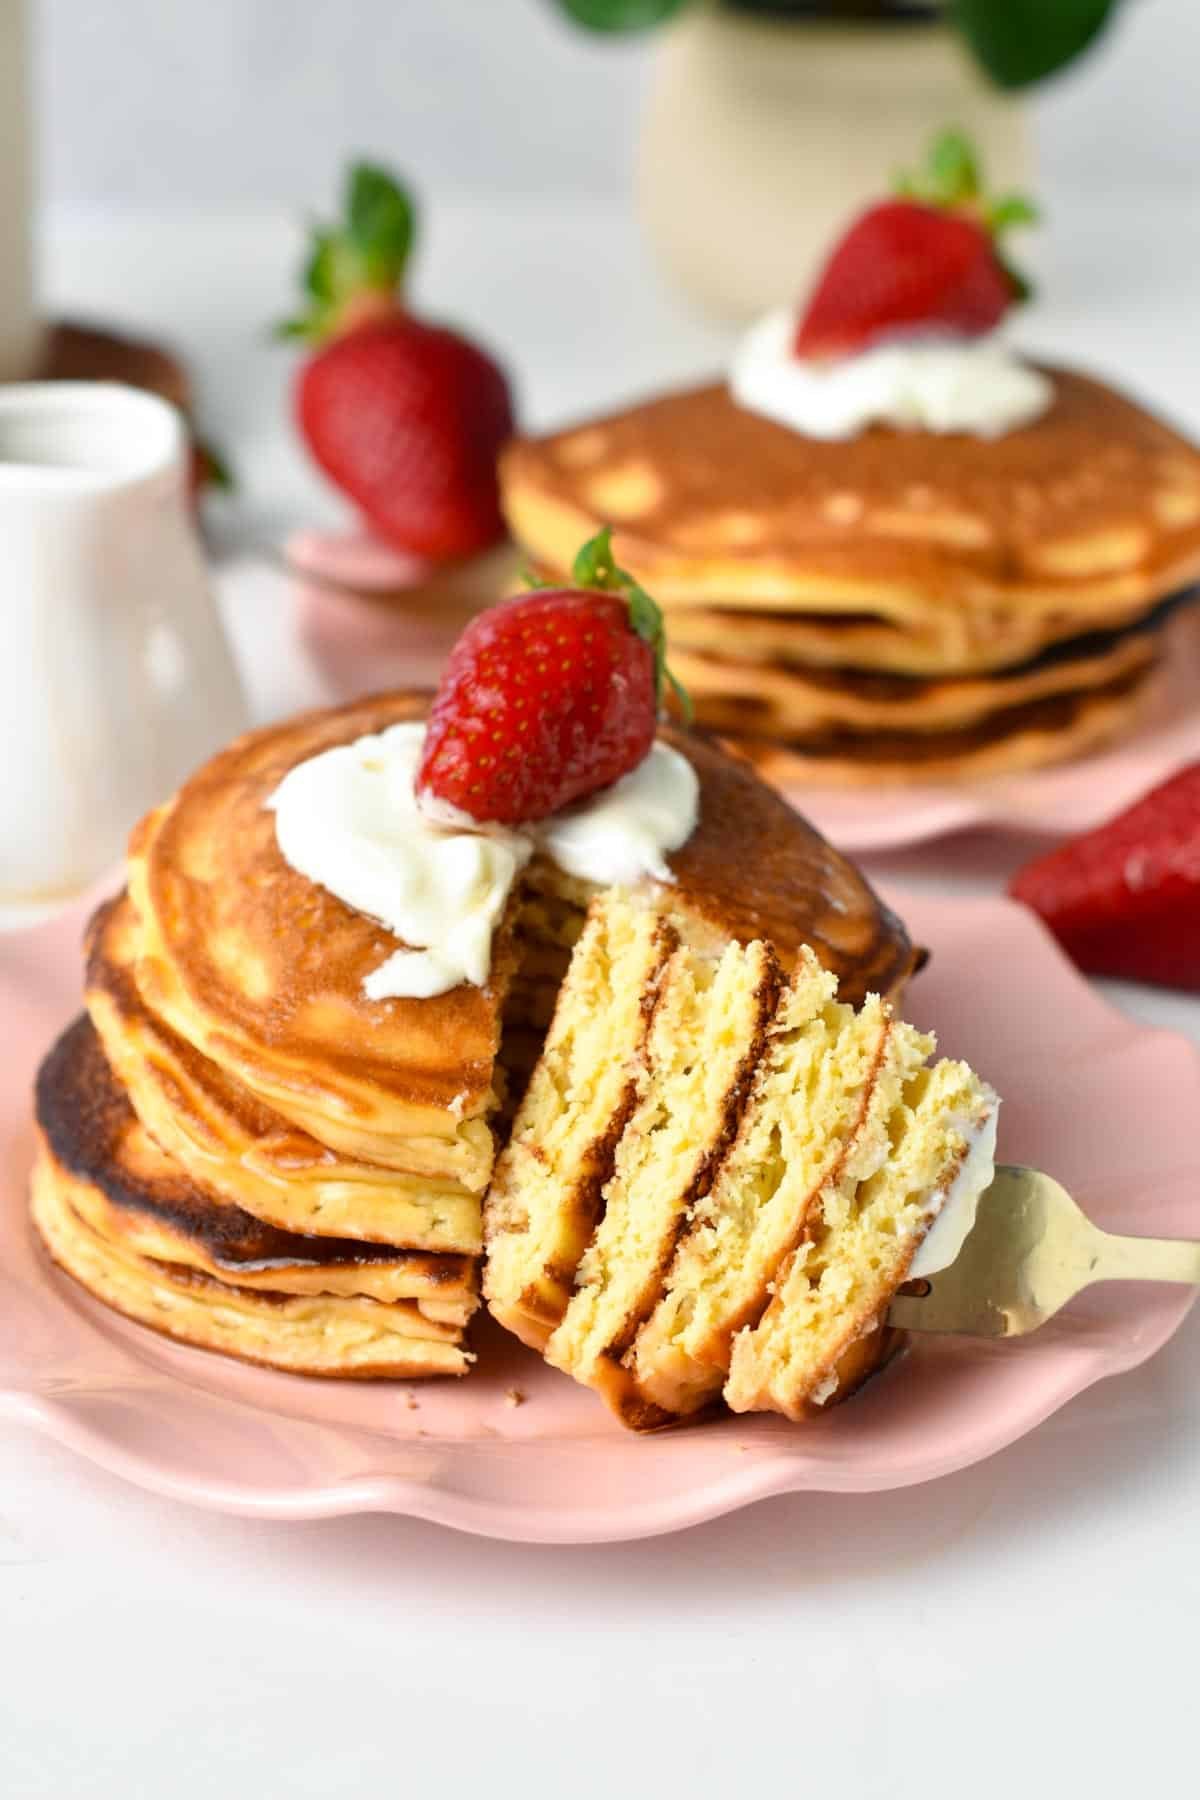 A pink plate with a stack of cottage cheese pancakes, cut and showing the fluffy texture inside.